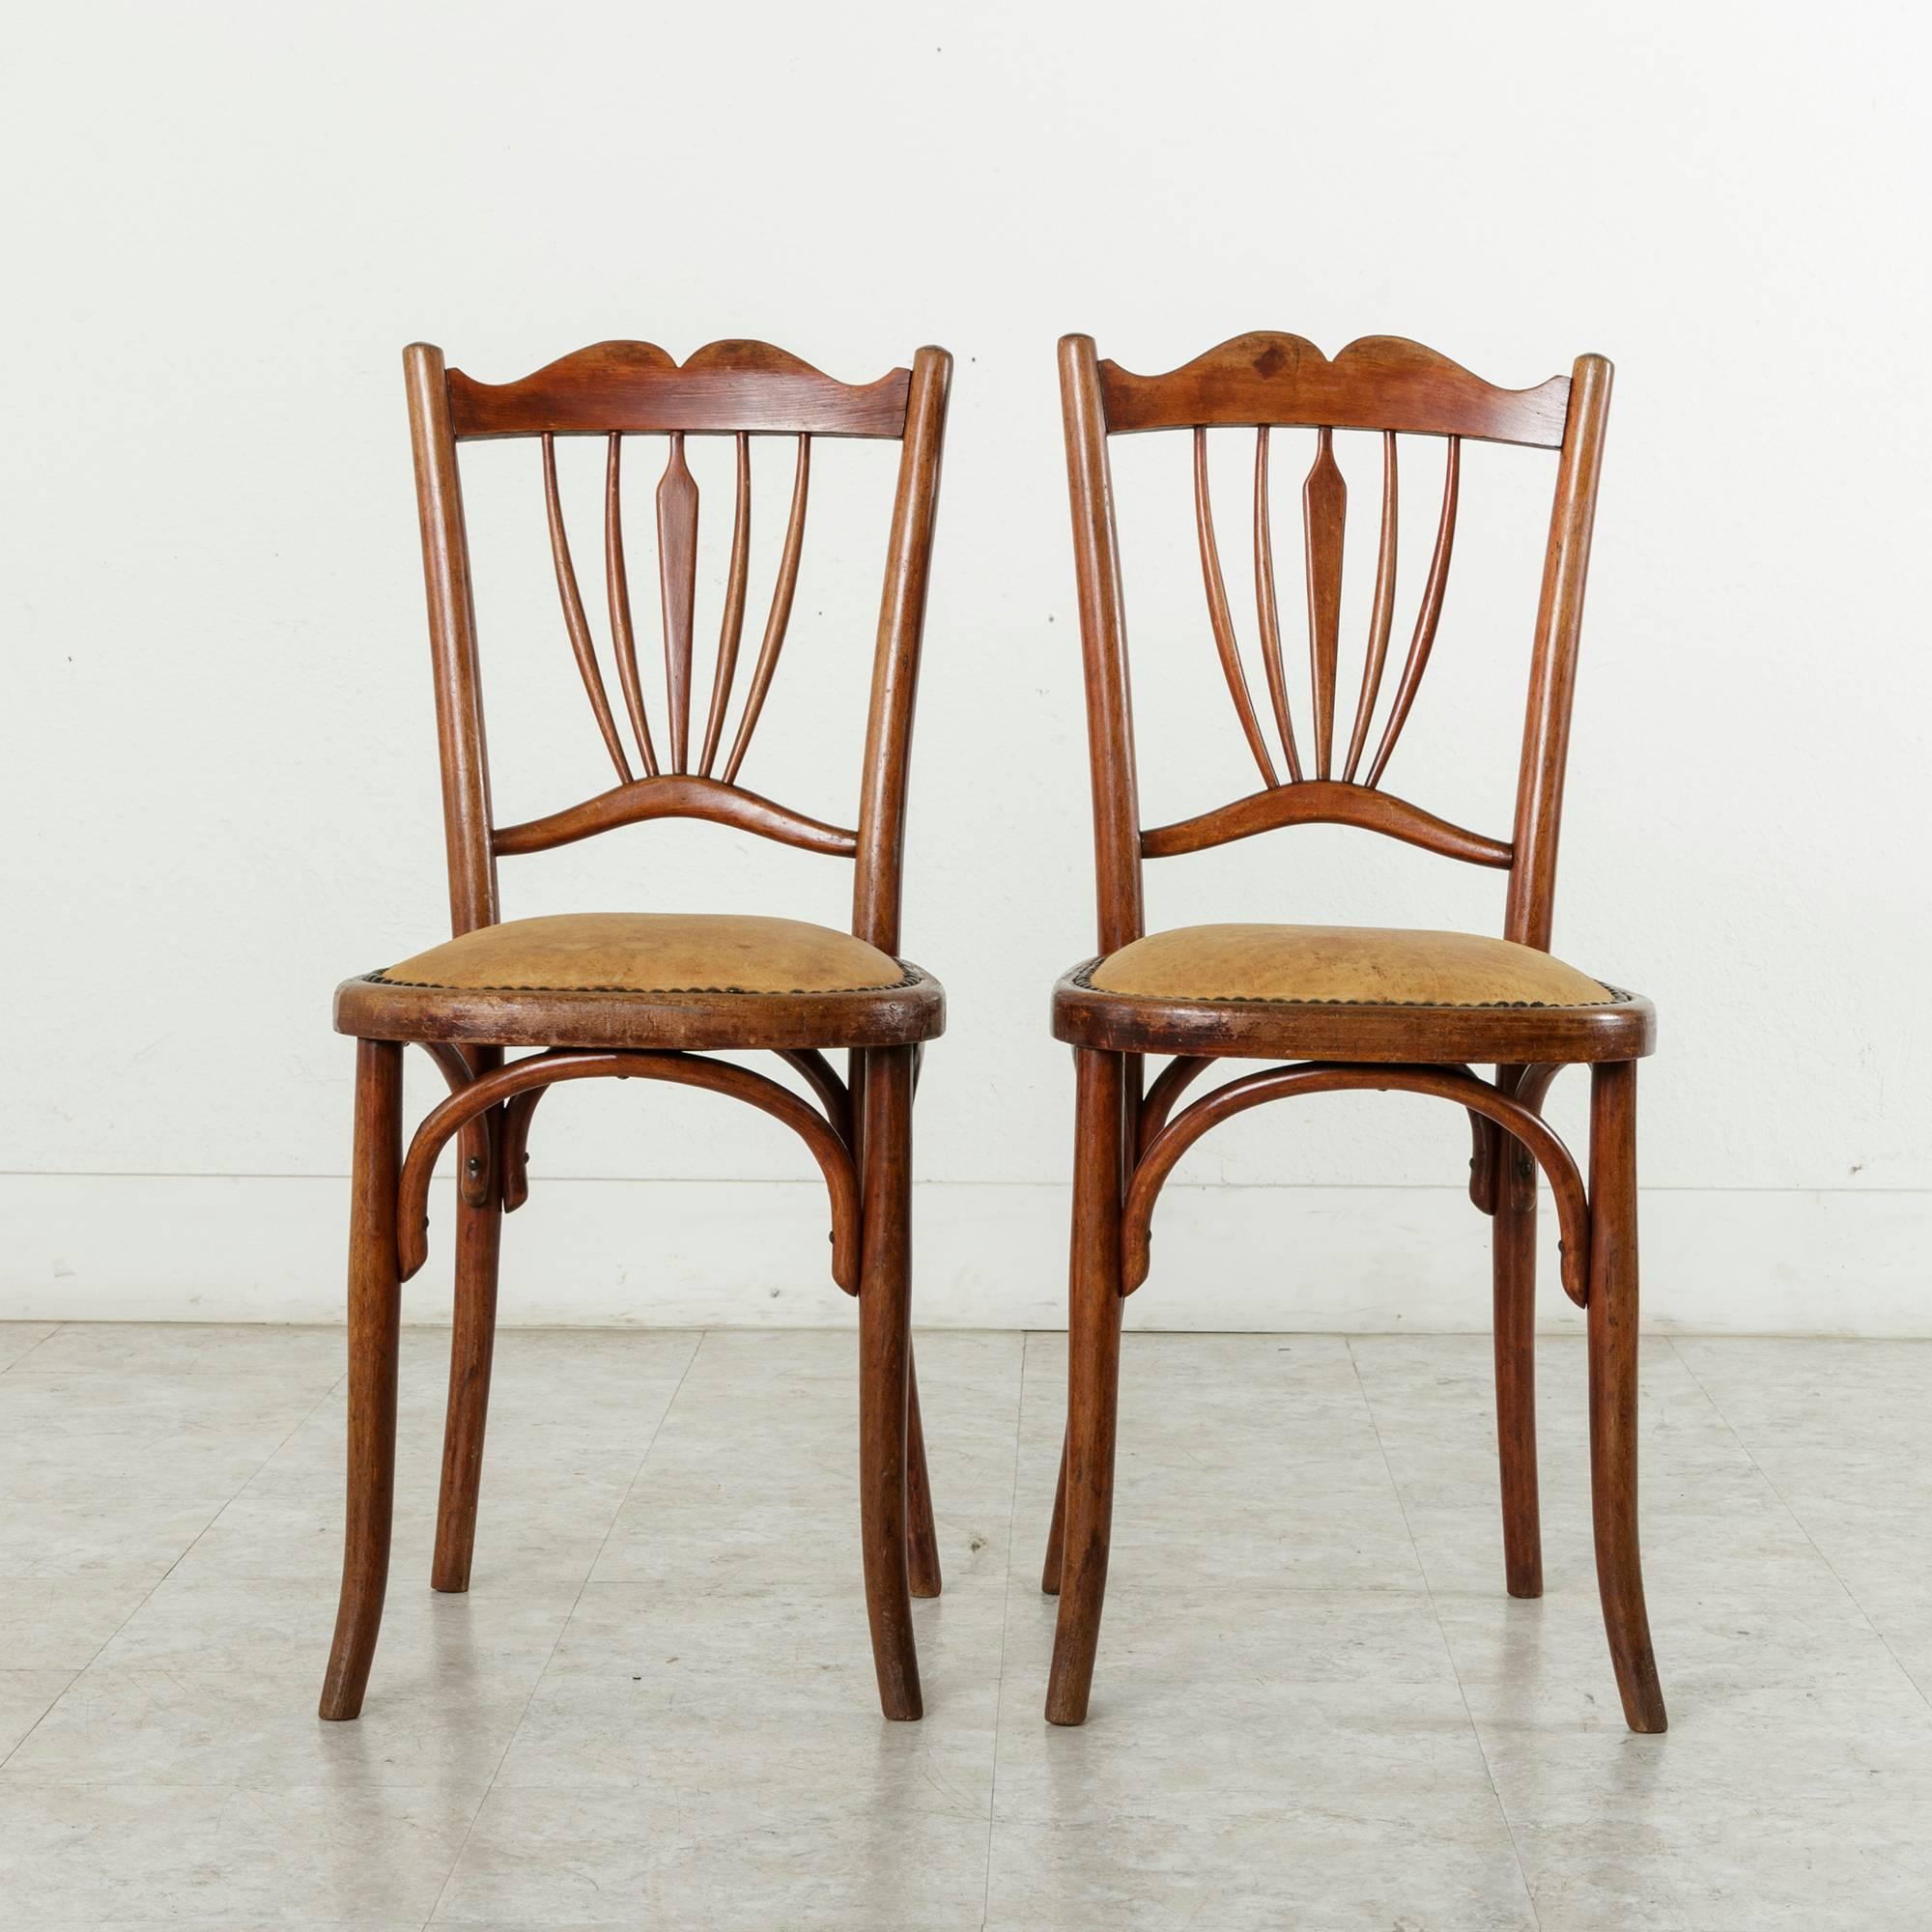 This pair of Art Deco period chairs in the style of Thonet features bentwood frames with their original red toned finish. Their padded cognac leather seats are finished with nailhead trim. Originally used in a French bistro, Paris in the 1920s comes